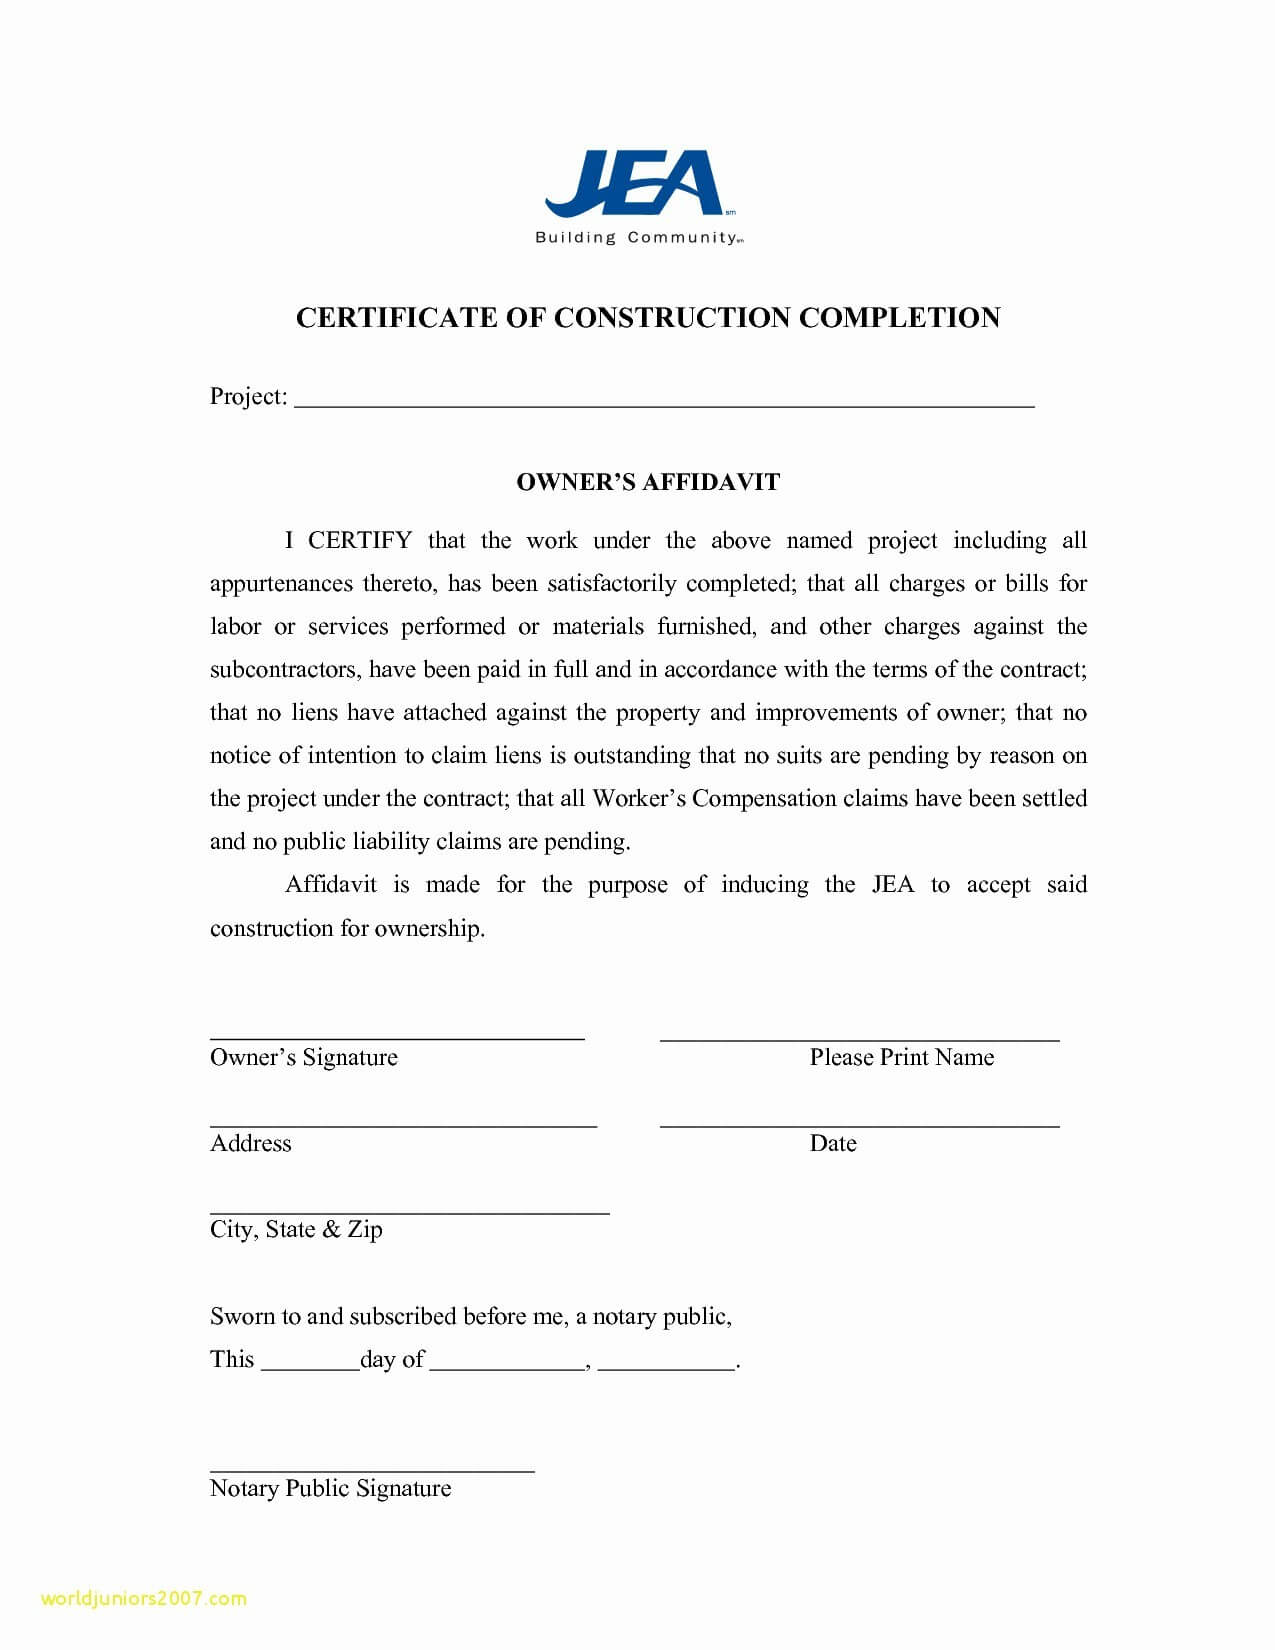 Letter Of Substantial Completion Template Examples | Letter Regarding Certificate Of Substantial Completion Template